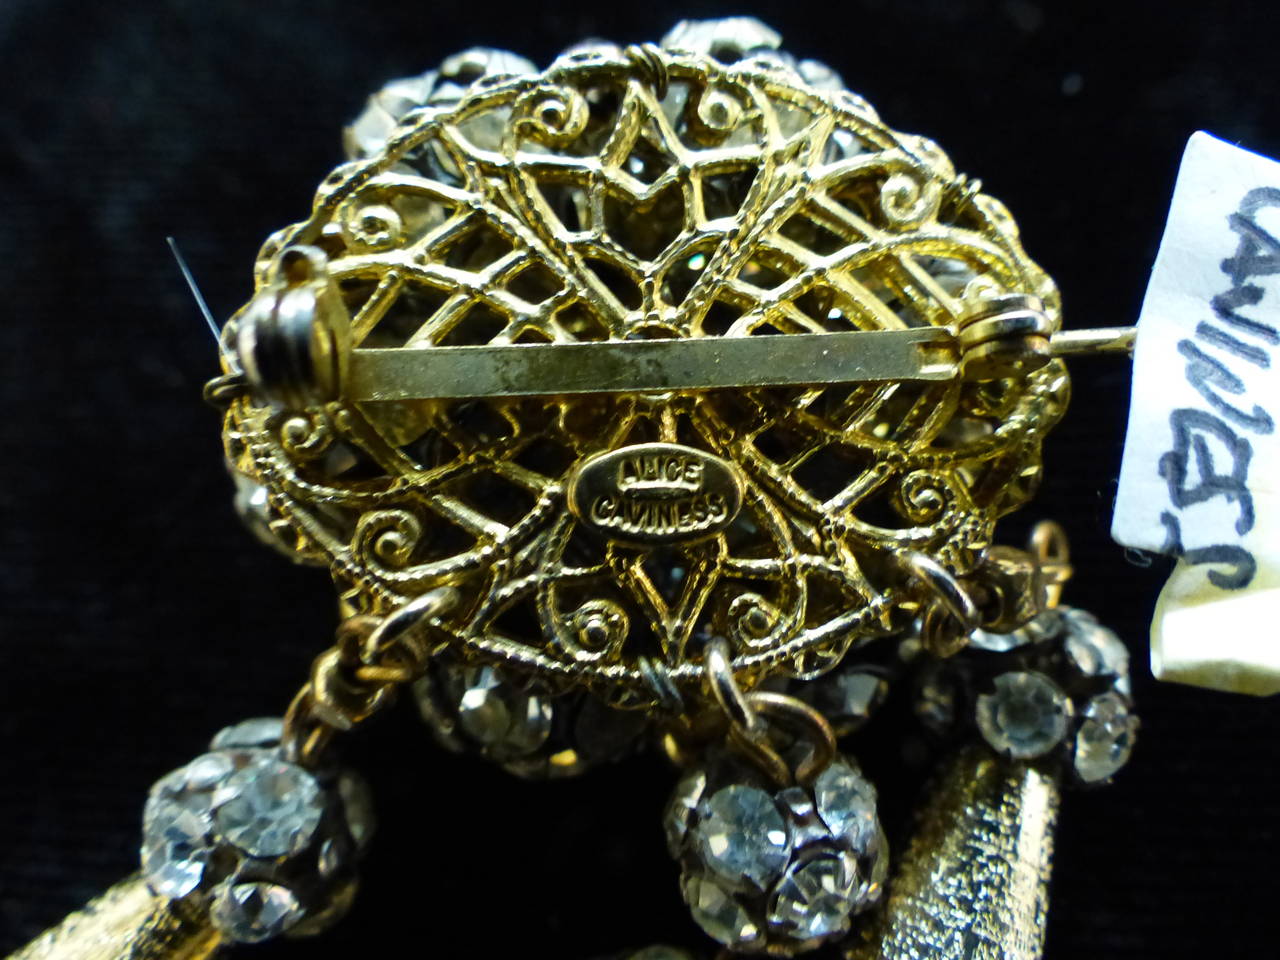 This vintage signed Alice Caviness pin features etched gold-tone beads with clear rhinestone accents in a gold-tone setting.  This pin measures 2 7/8” x 1 7/8”, is signed ‘Alice Caviness’ and is in excellent condition.